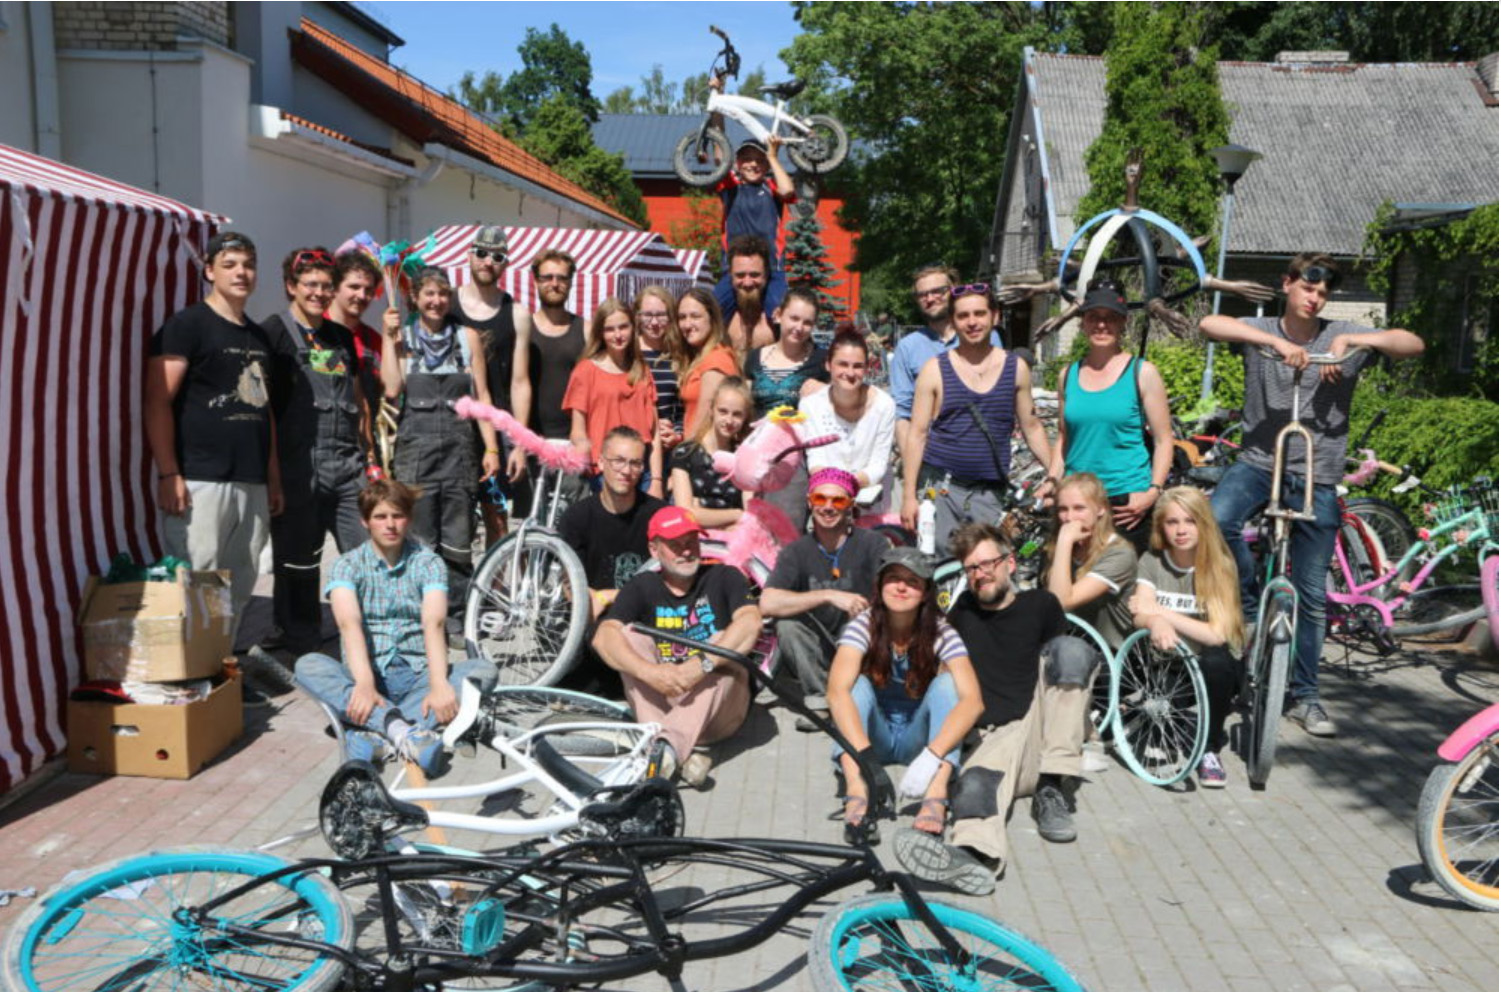 a group of young bicycle modifiers assemble with their creations in a group photo